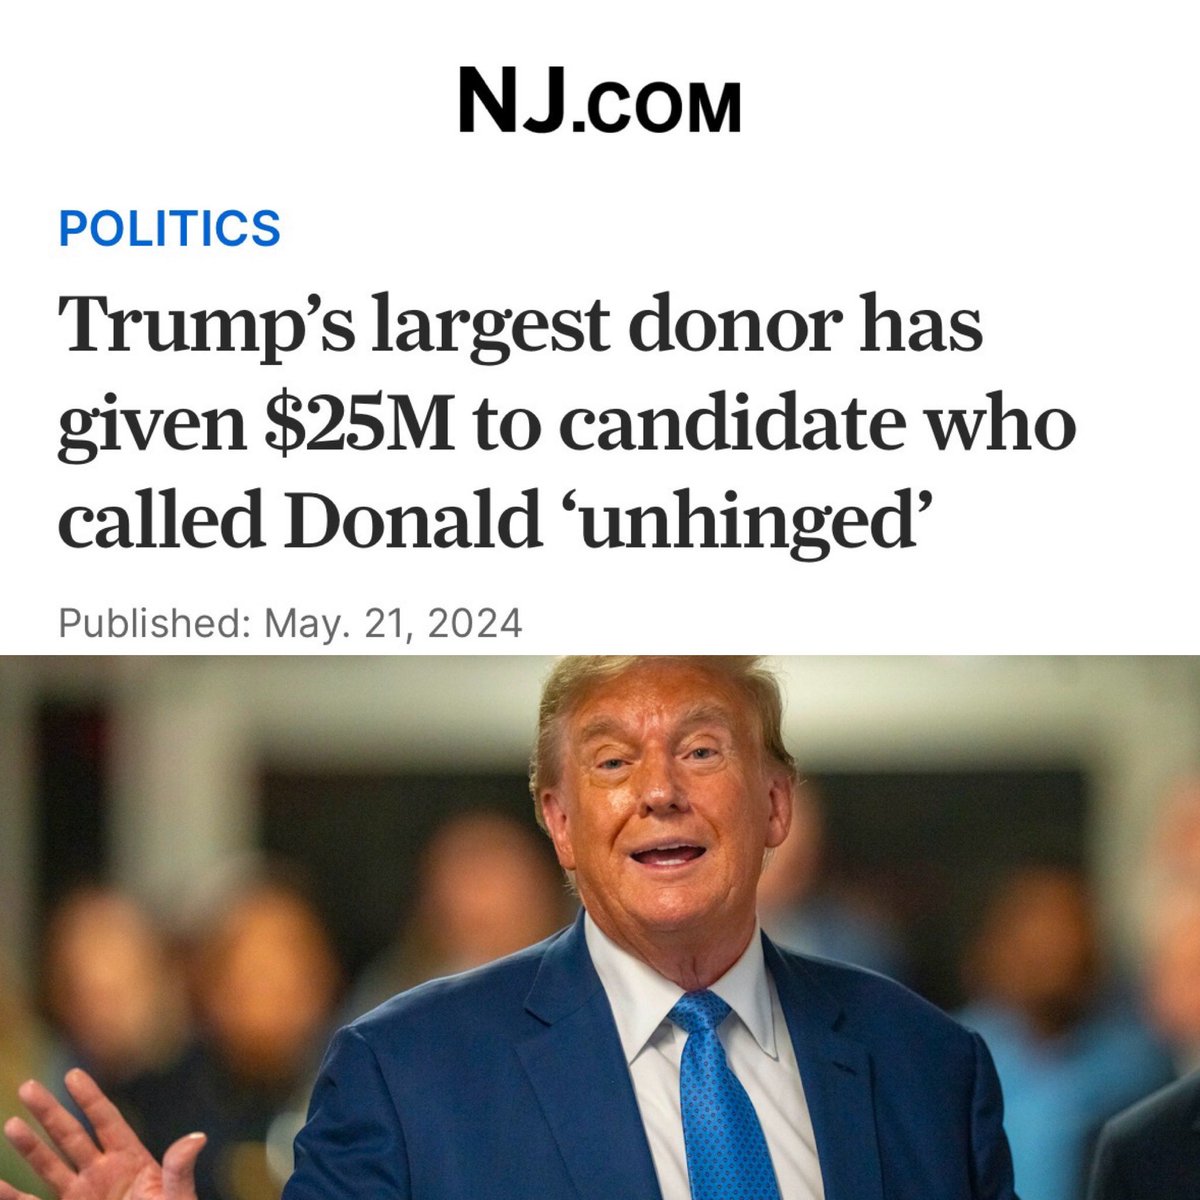 Donald Trump’s largest donor, who has given him over $36.5 million, also gave RFK Jr. $25 million. The maximum contribution an individual can legally give to a candidate is $3300 — but, Super PACs let billionaires legally buy elections. End dark money in politics.